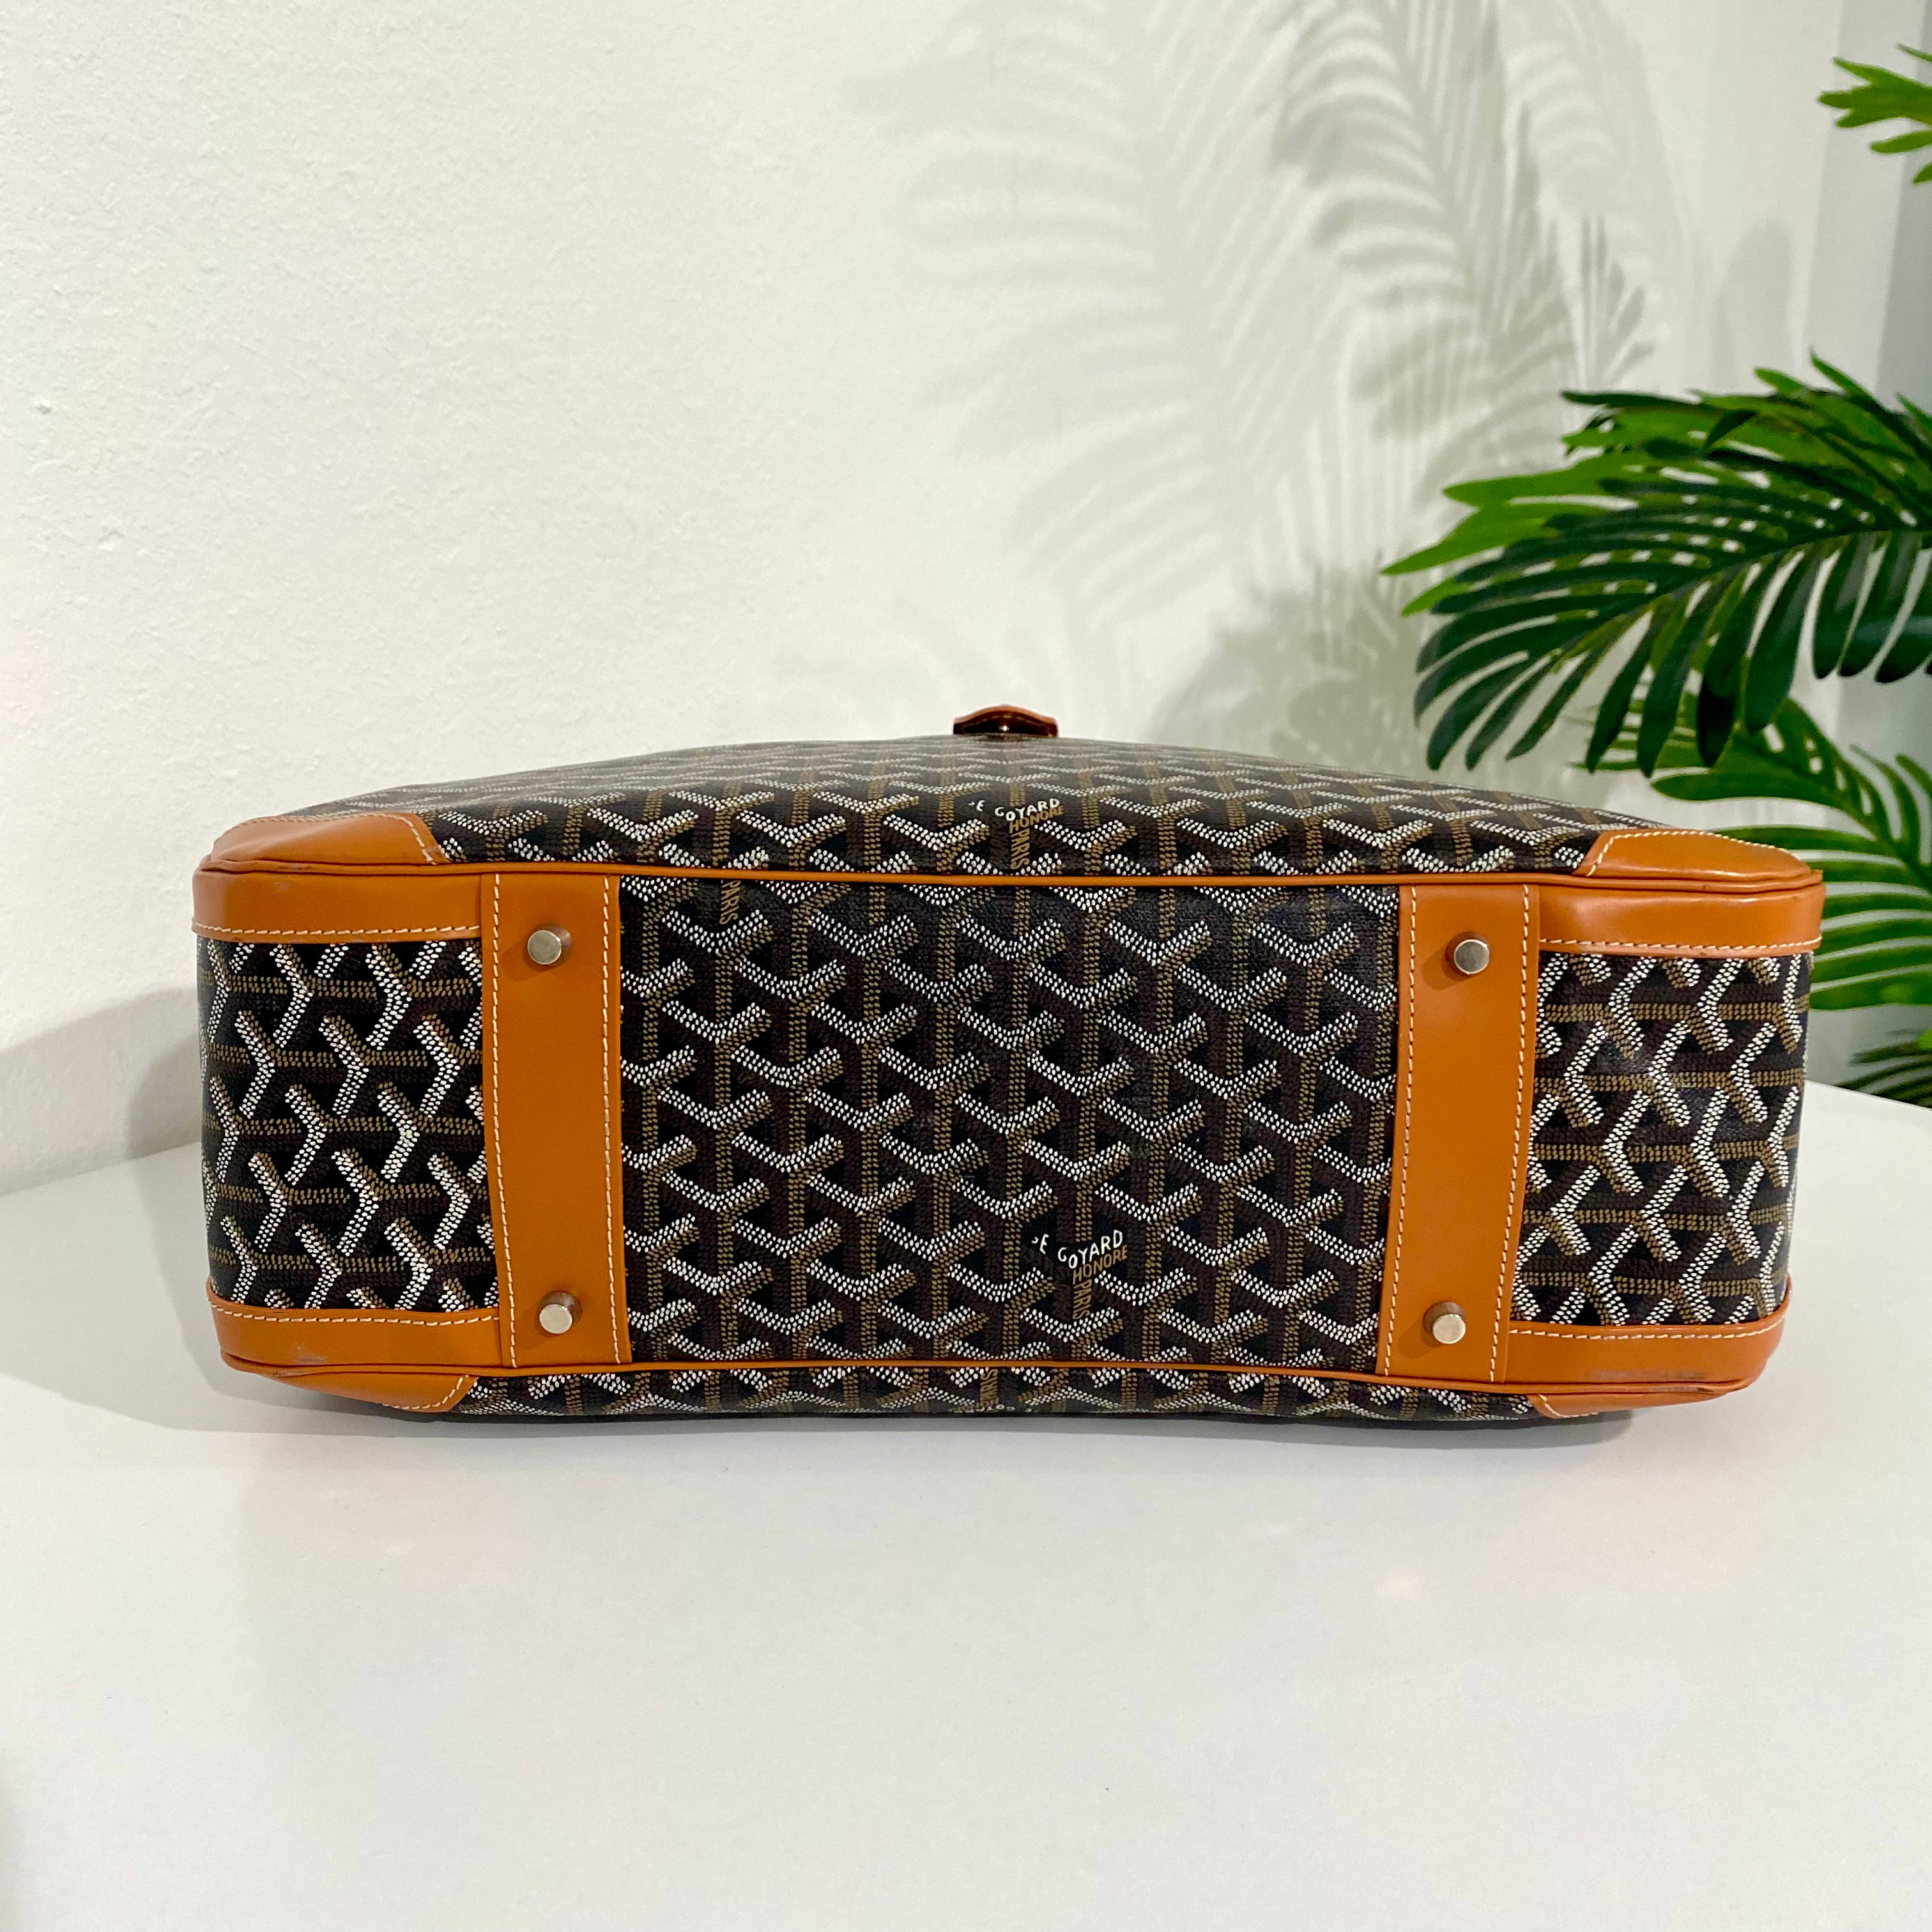 Musings of a Goyard Enthusiast: August 2011